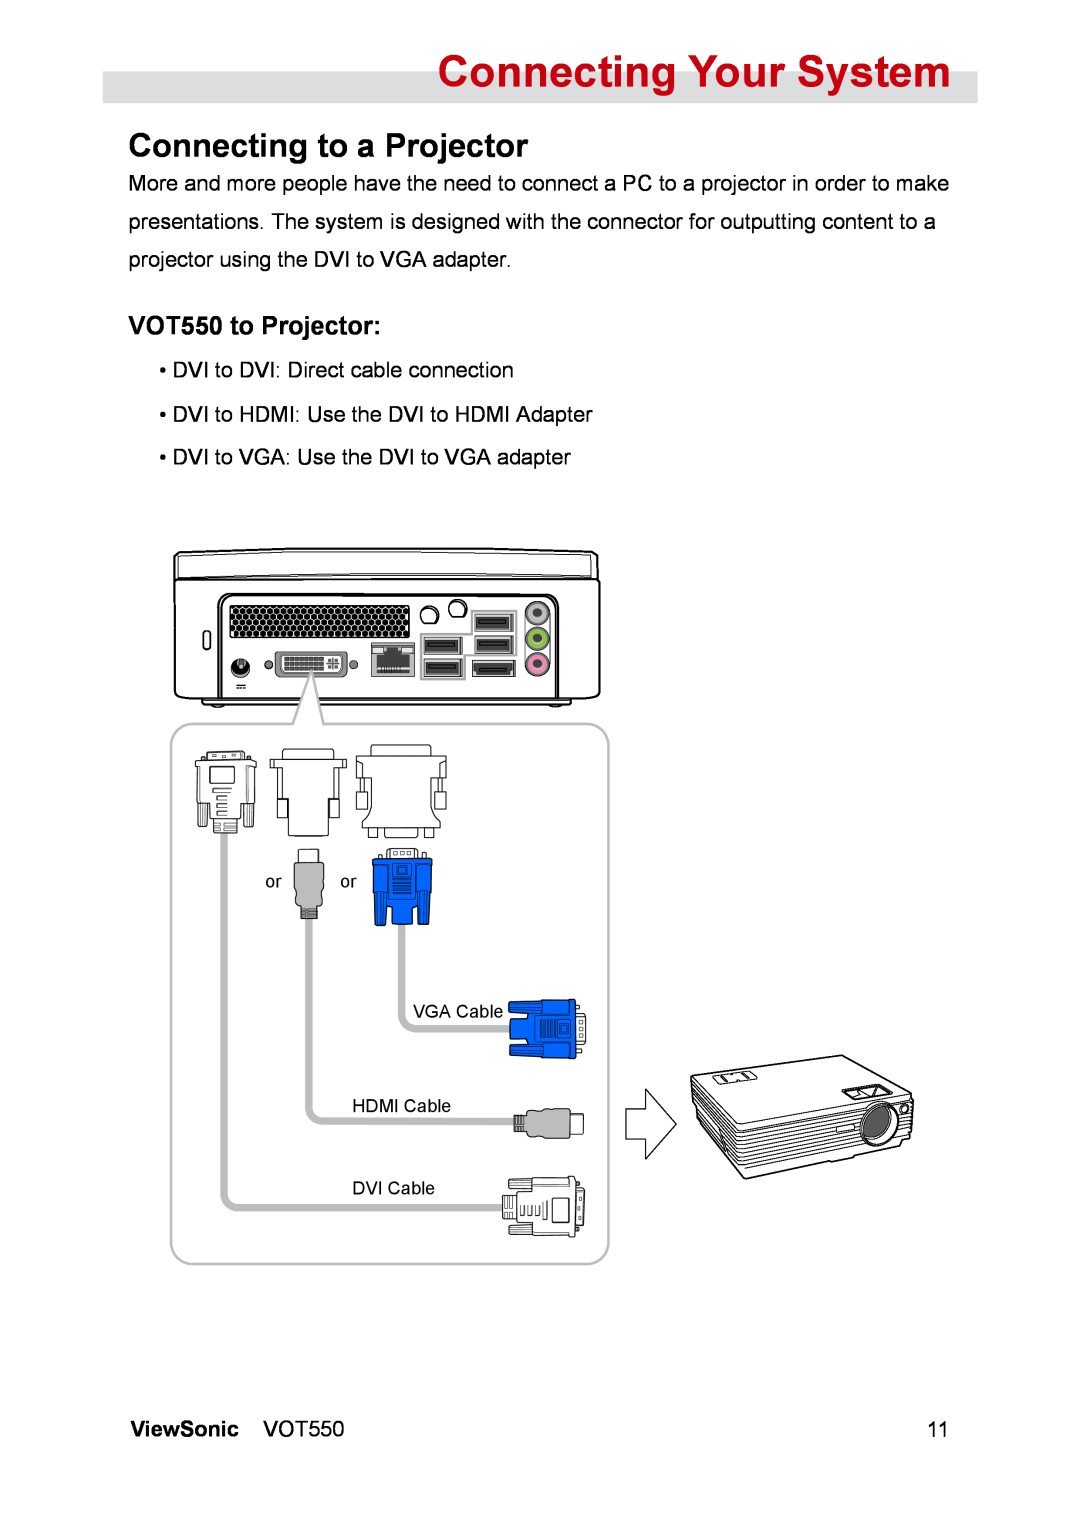 ViewSonic manual Connecting to a Projector, VOT550 to Projector, Connecting Your System, ViewSonic VOT550 